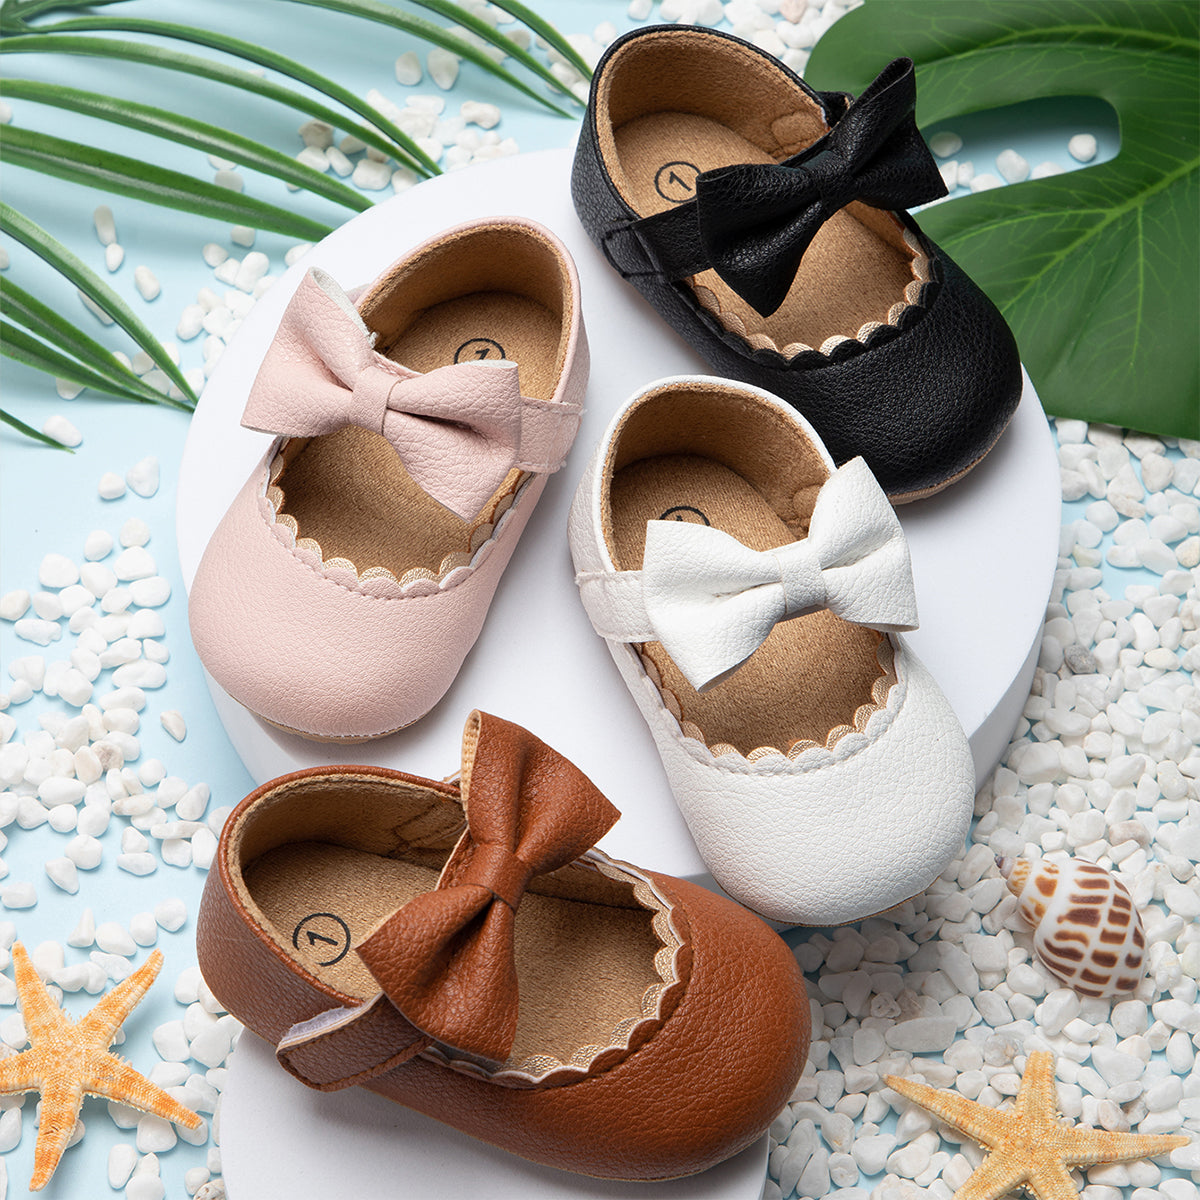 Bowknot Soft-Sole Toddler's Sandal